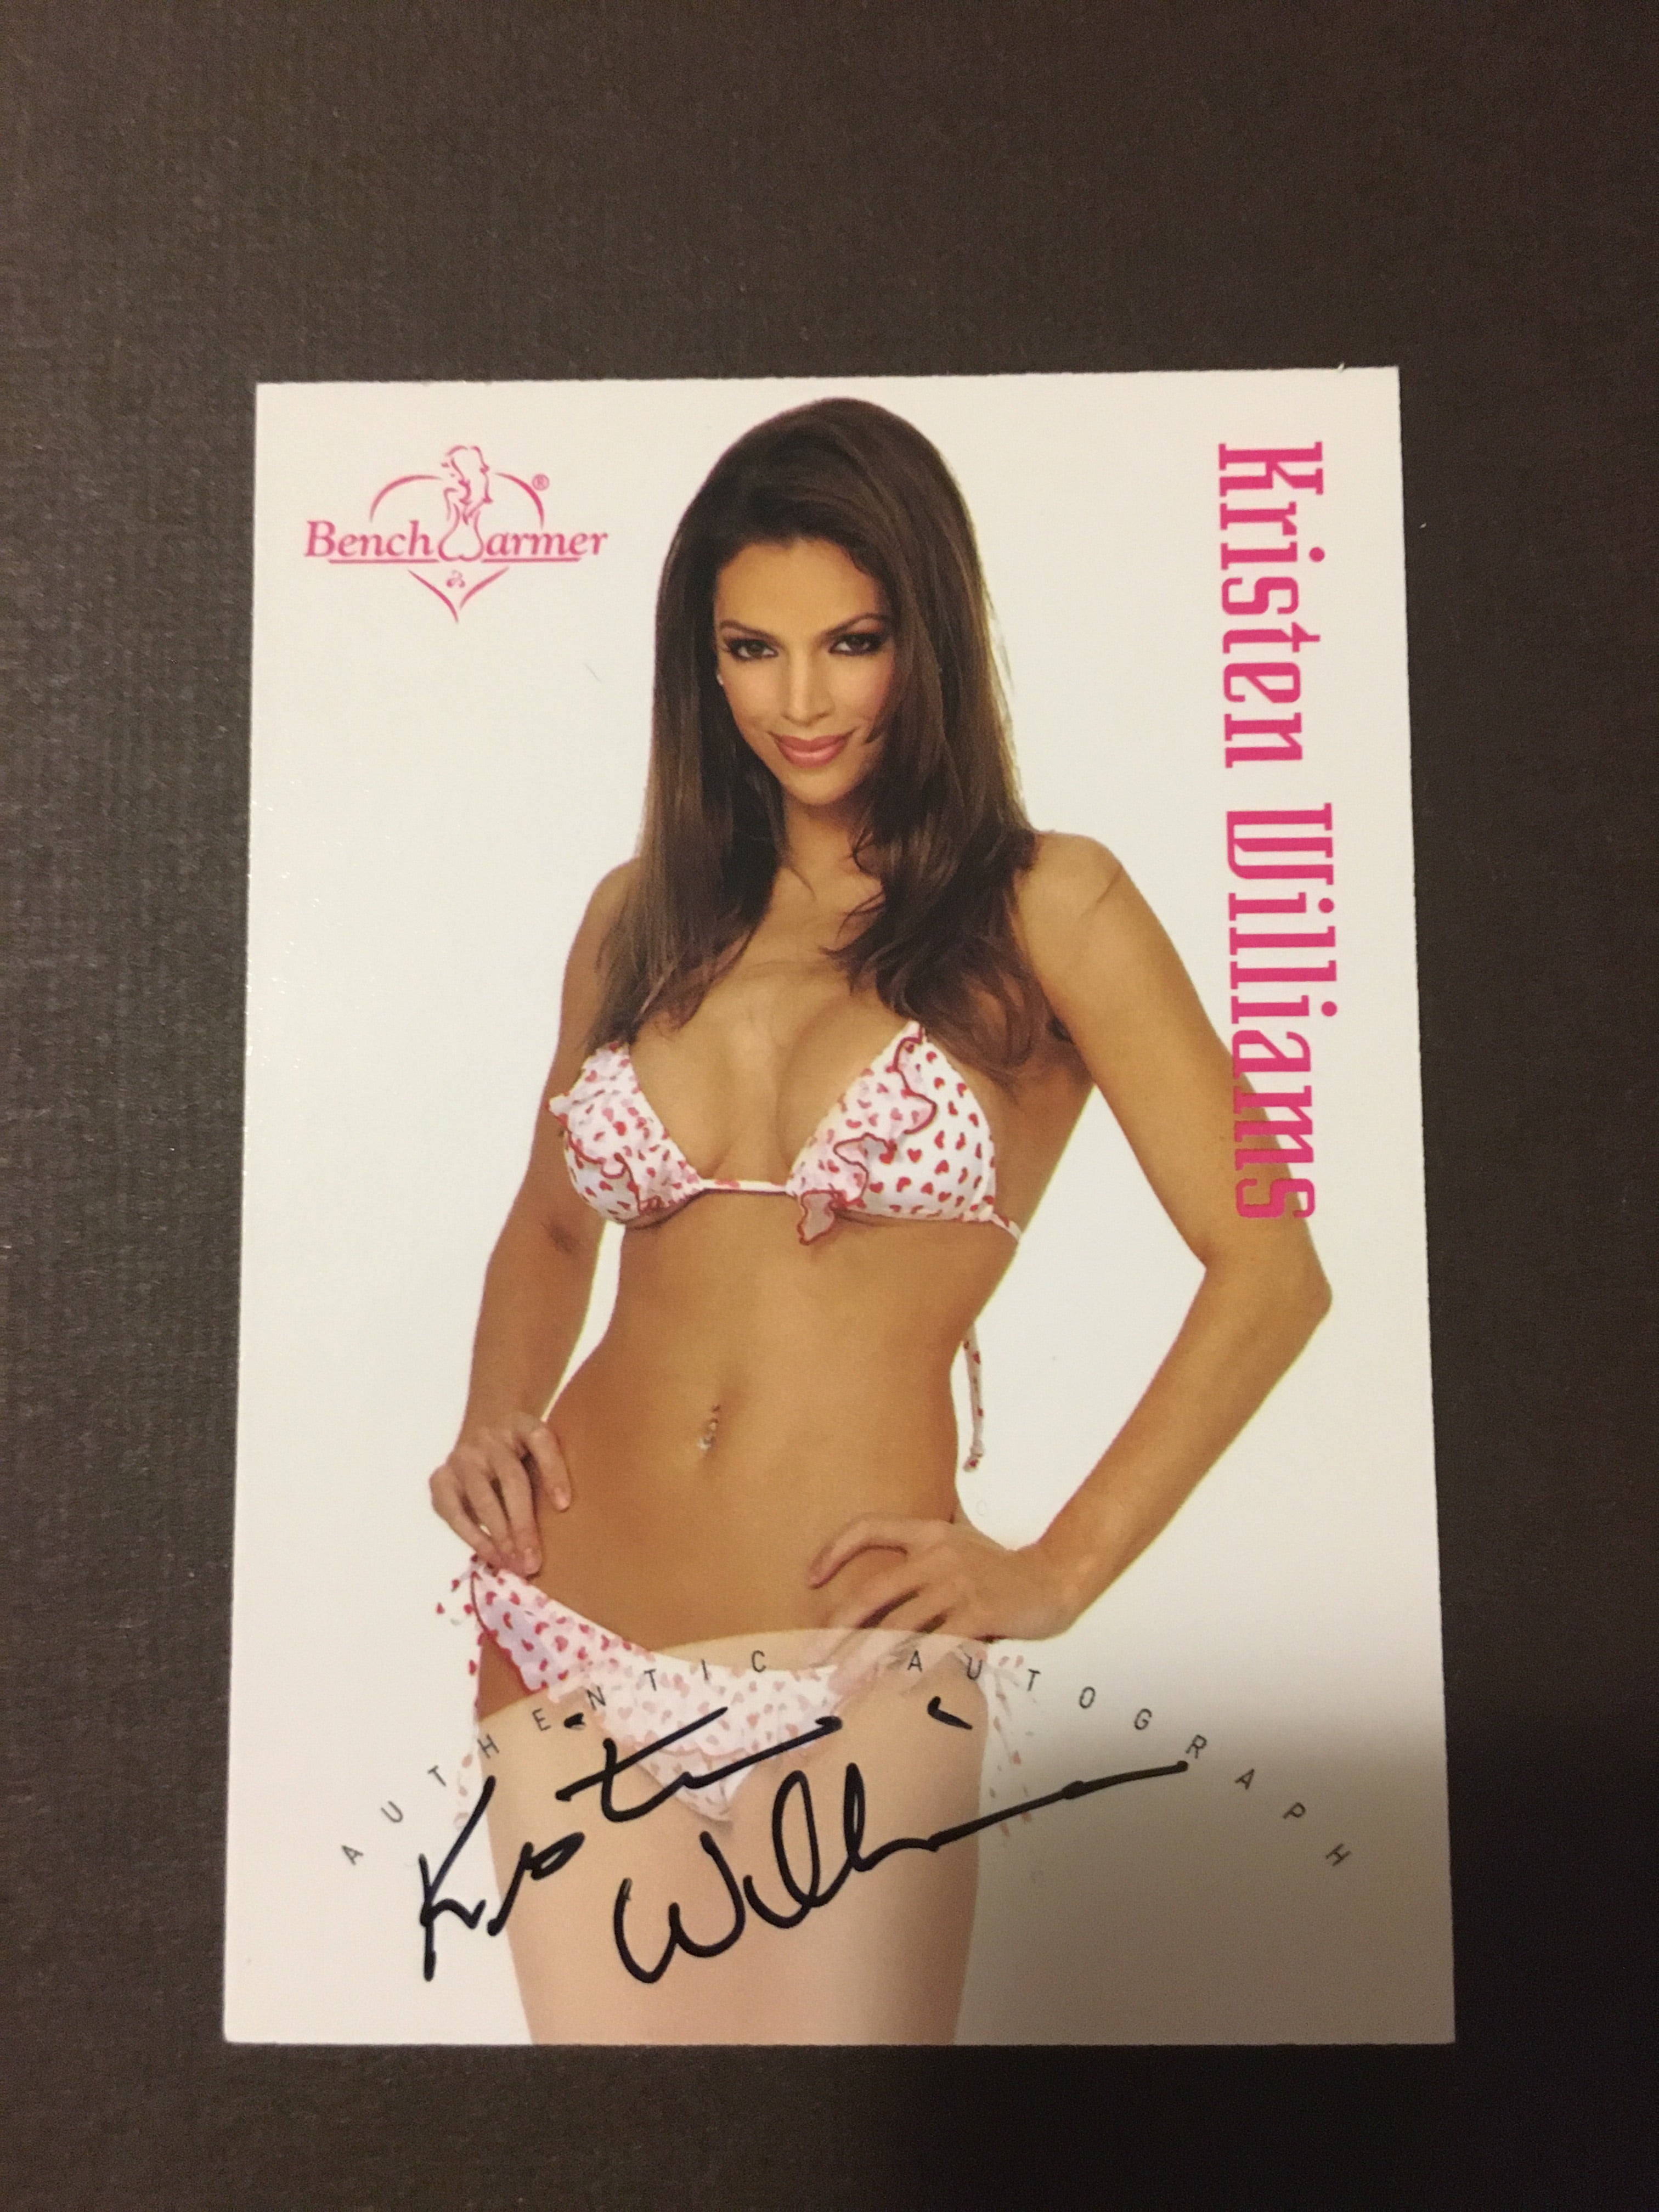 Kristen Williams - Autographed Benchwarmer Trading Card (2)